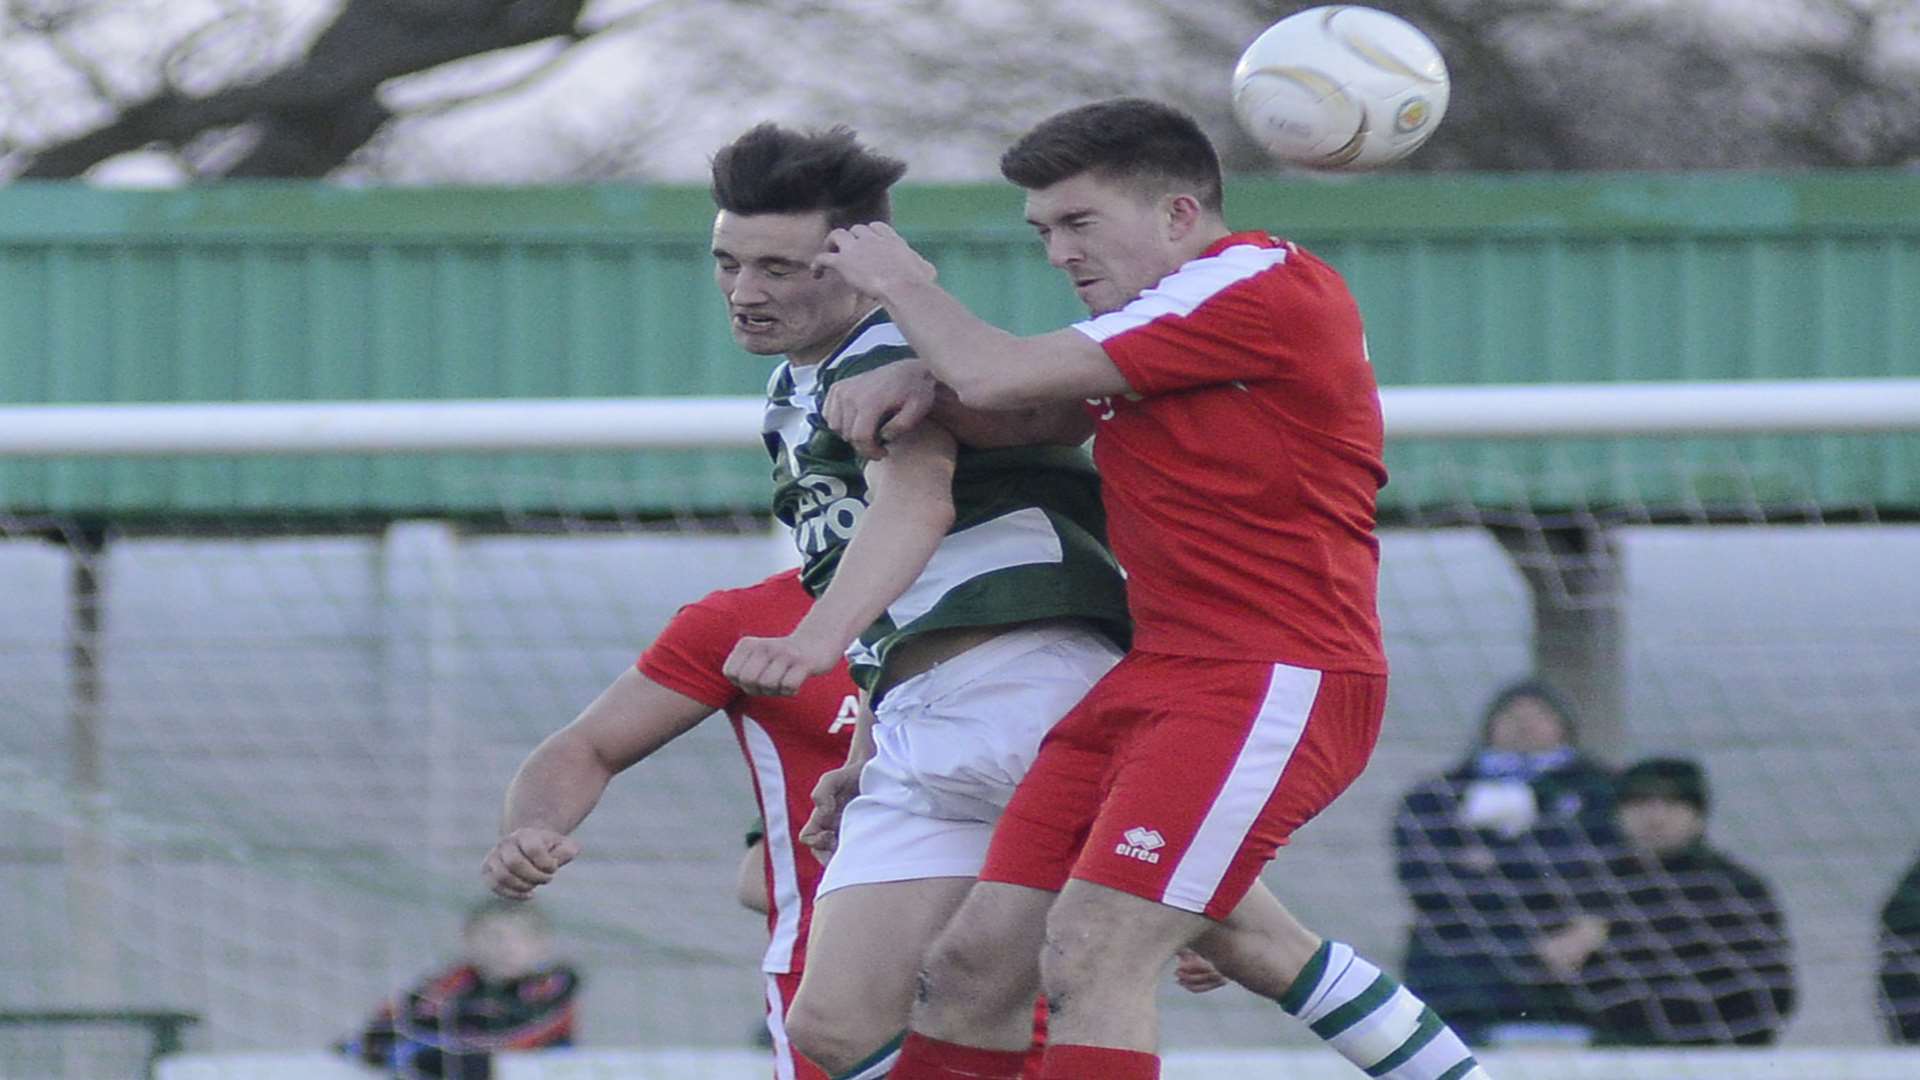 EYES SHUT: Josh Woolley challenges for the ball in an aerial duel during Ashford United's 1-1 FA Vase draw at Homelands Pic: Paul Amos